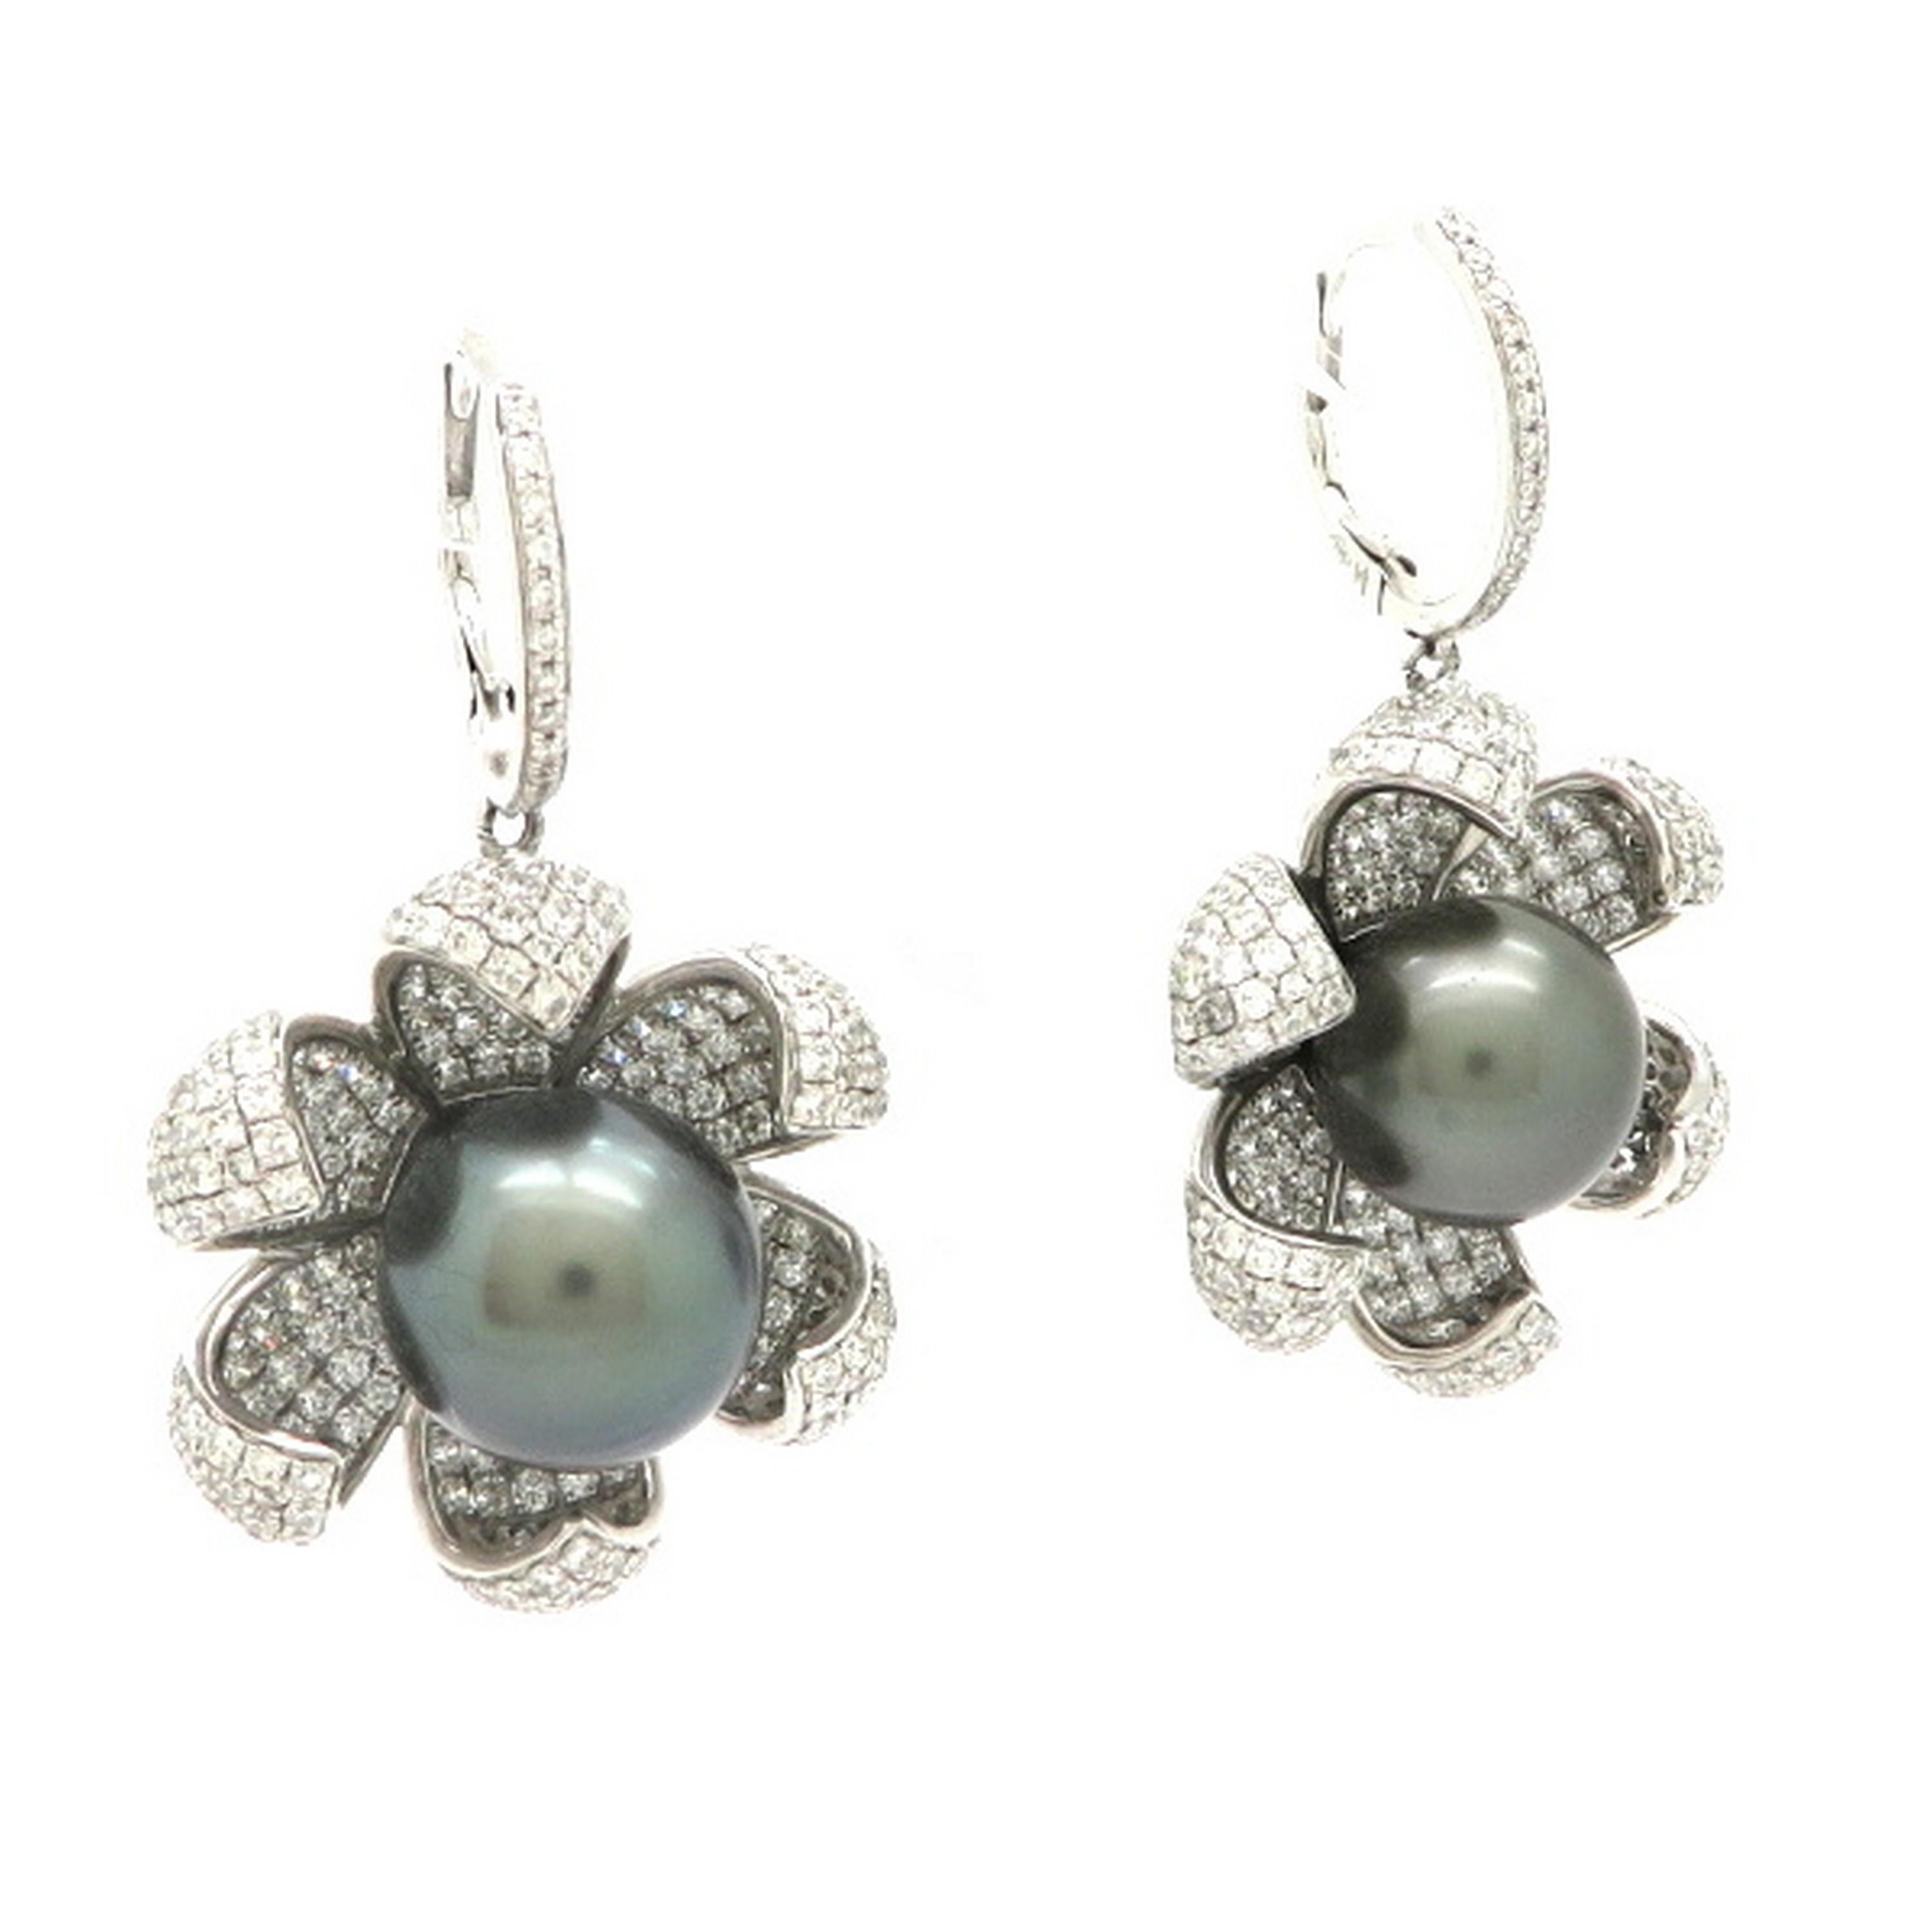 Estate 18K white gold Tahitian Pearl and pave diamond flower dangle earrings. Showcasing two Tahitian round black pearls, each measuring 12 mm. Accented with 586 round brilliant cut pave set diamonds set in a floral motif. The dangle earrings are